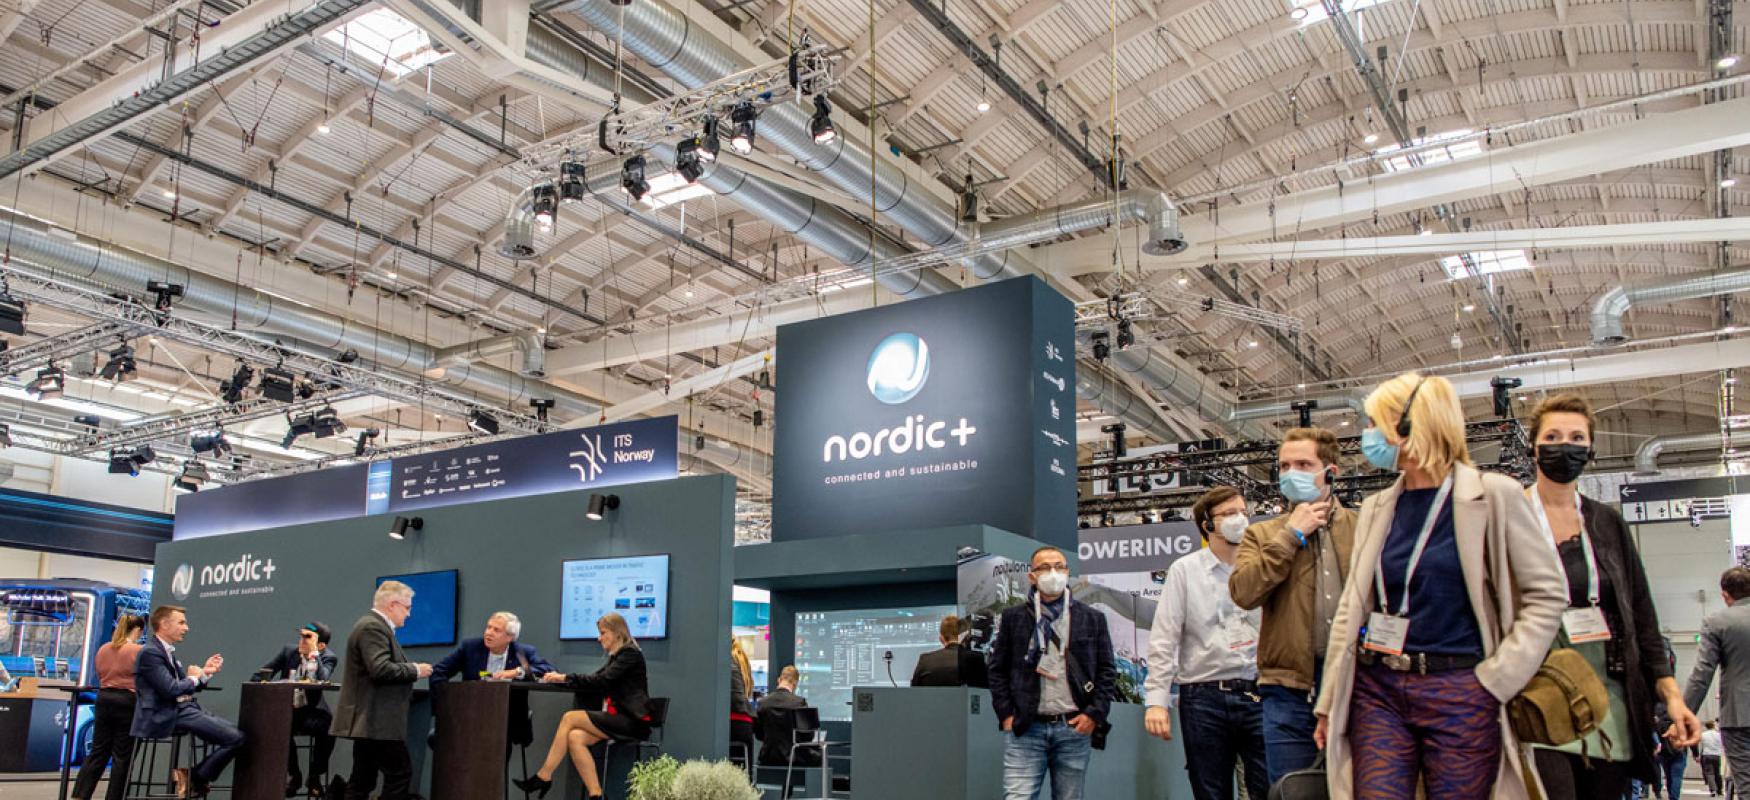 The Nordic Plus Pavilion at the ITS World Congress 2021